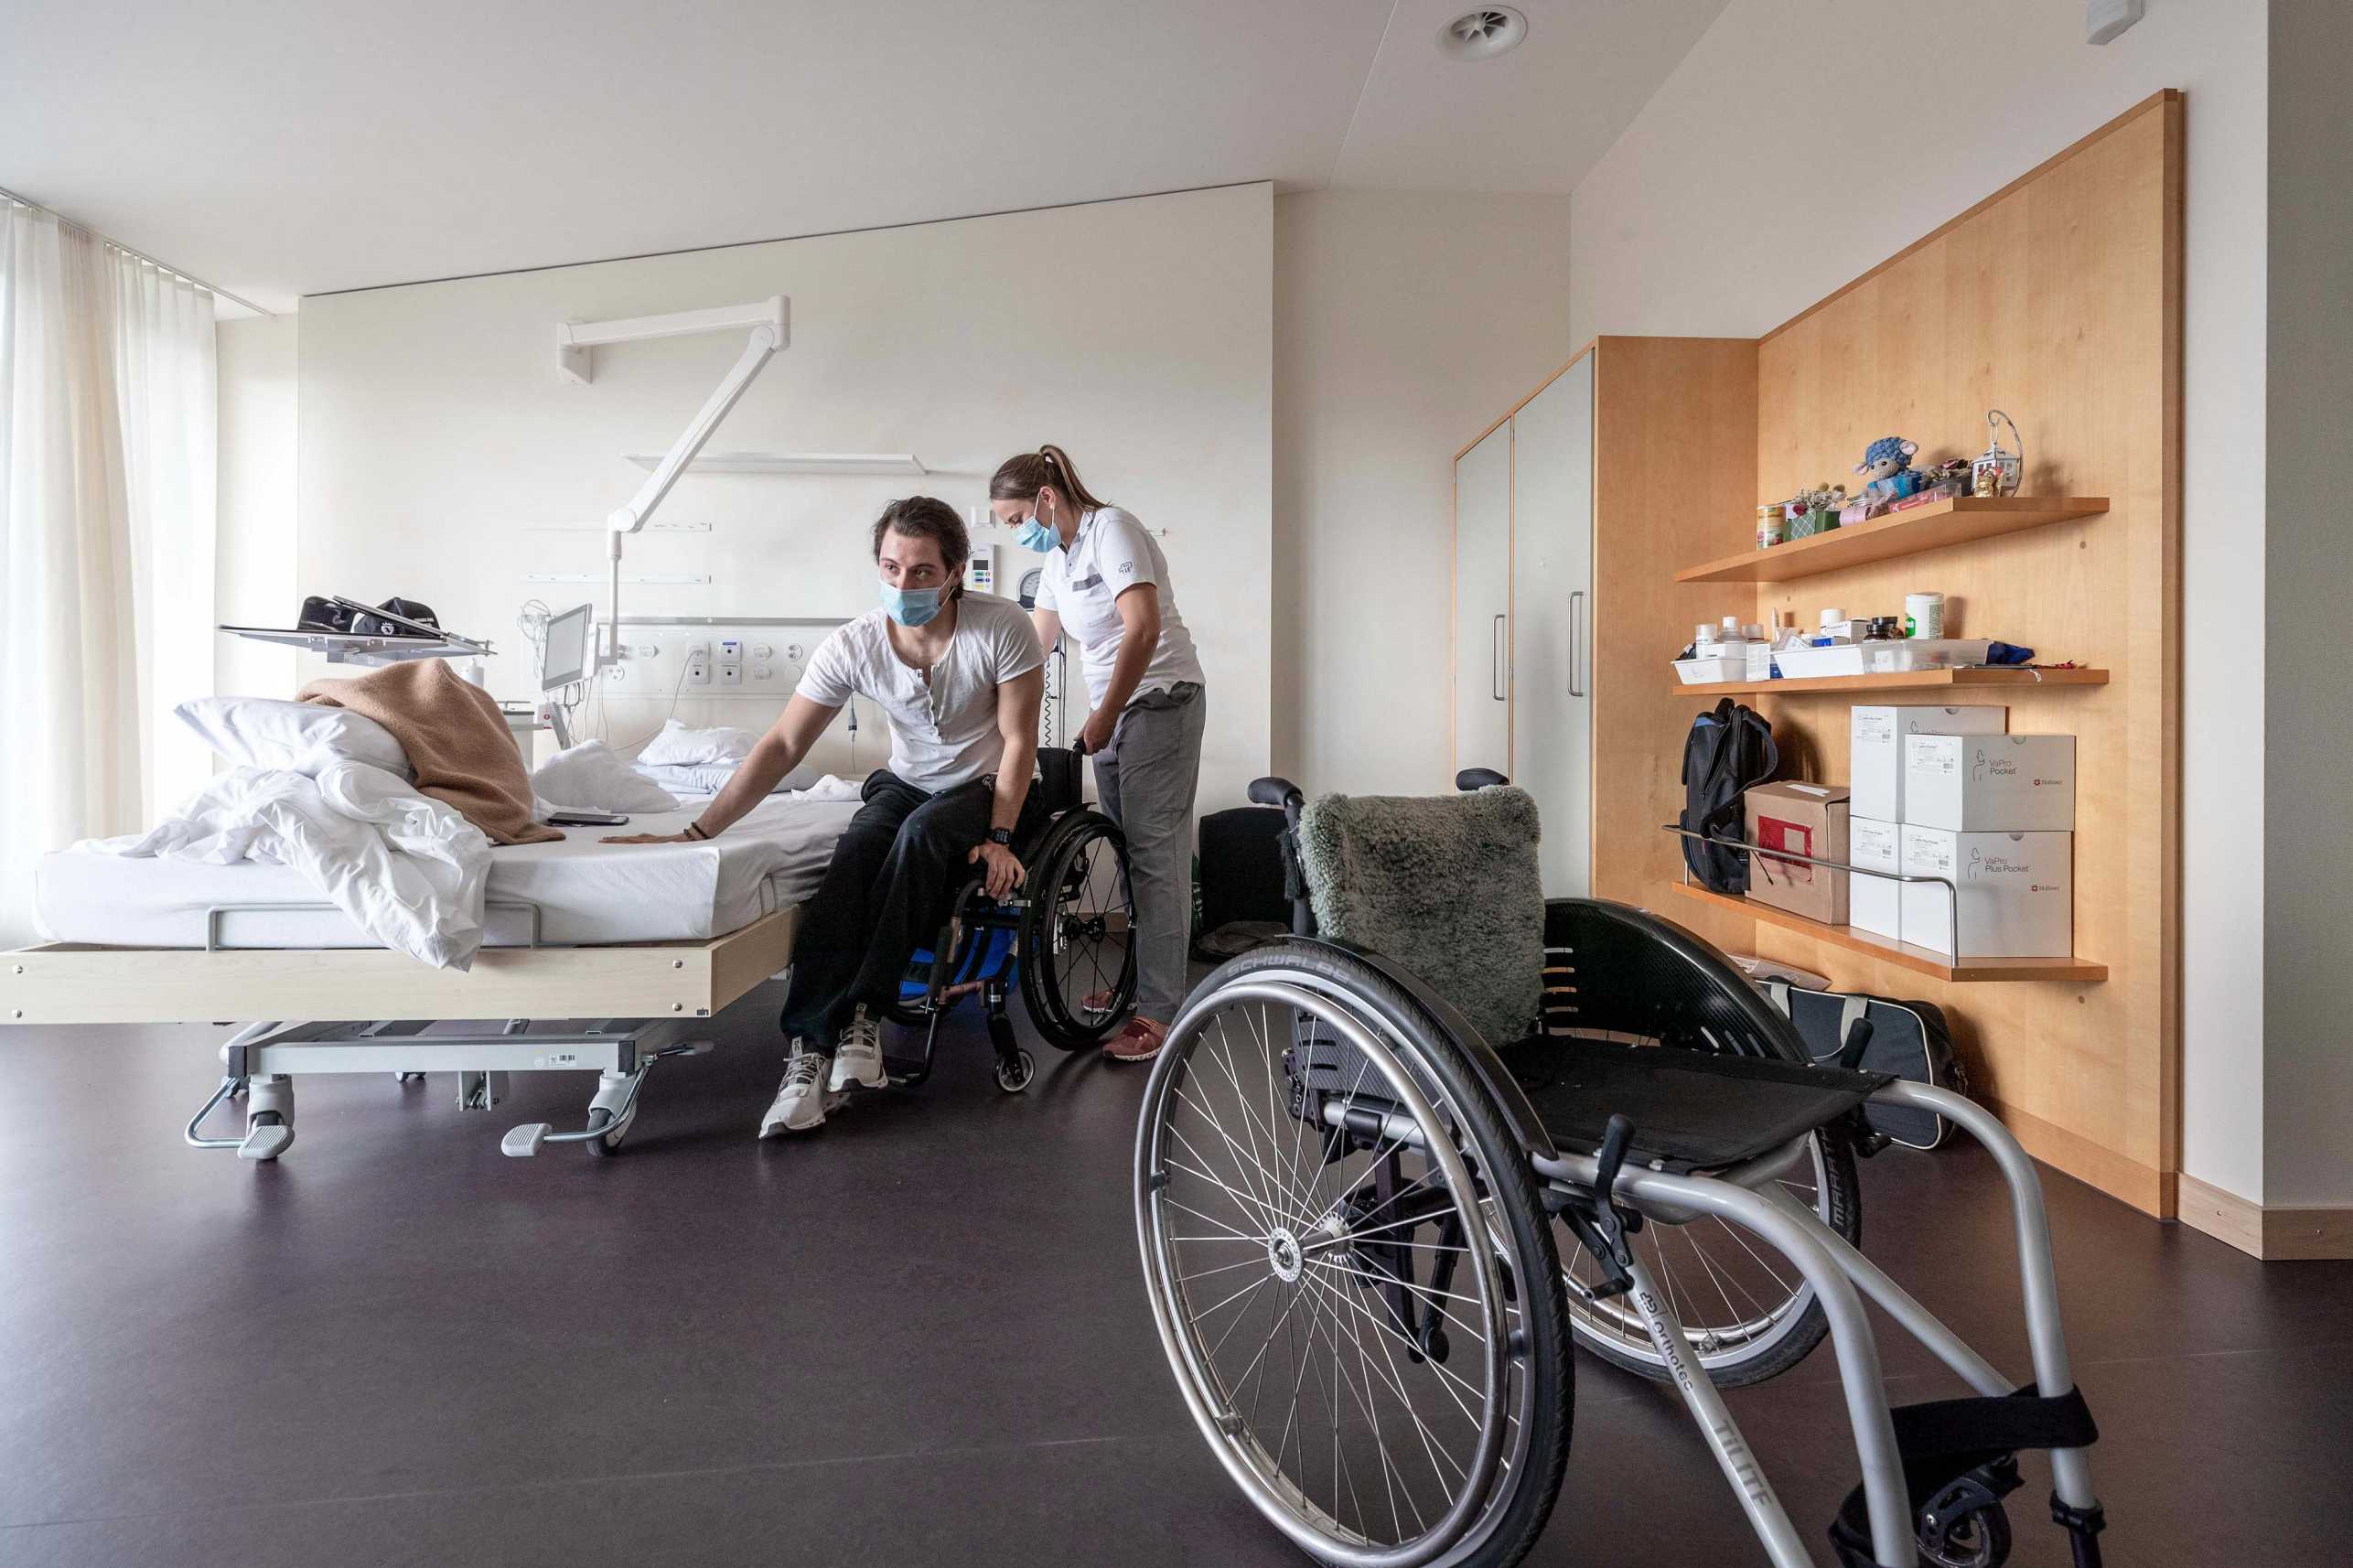 Enlarged view: An SCI person being assisted by a nurse to transfer from a hospital bed to a wheelchair